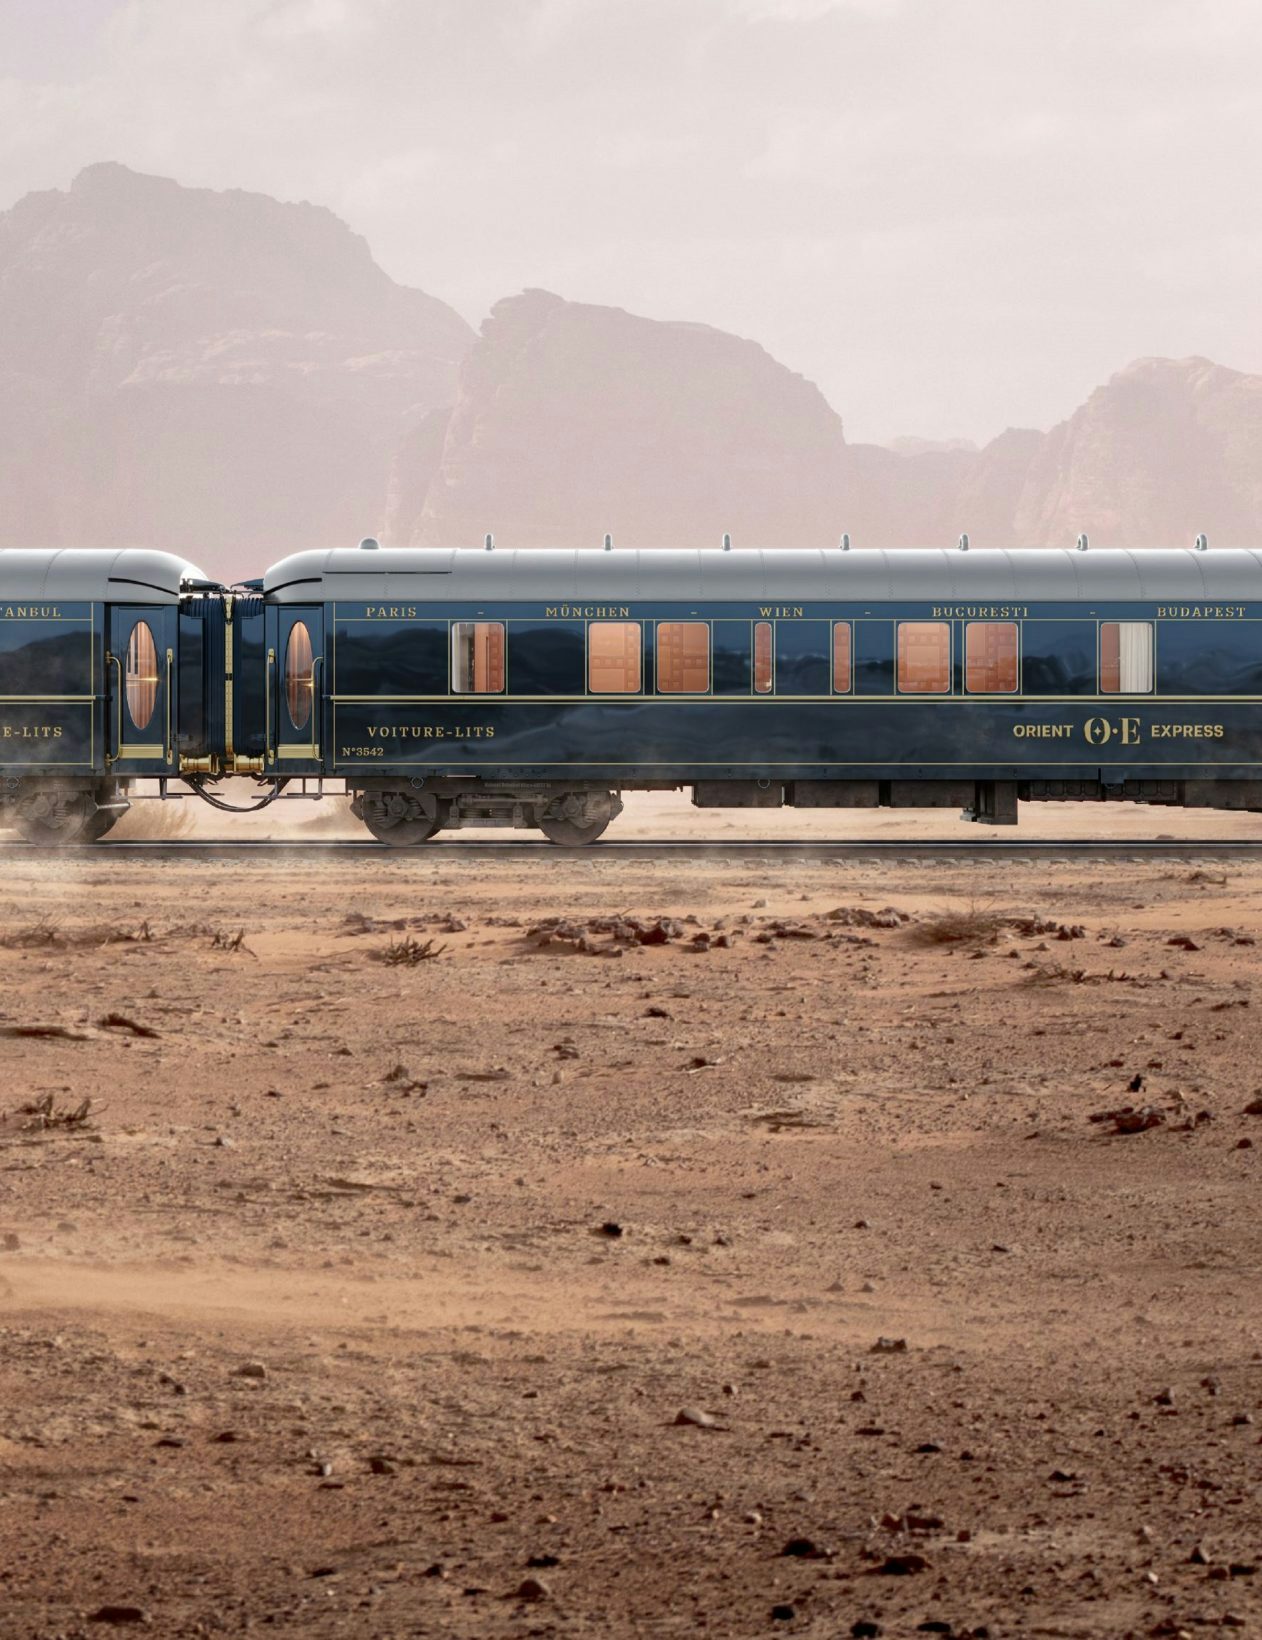 Saudi Arabia bets on tourism with the inauguration of a luxury train